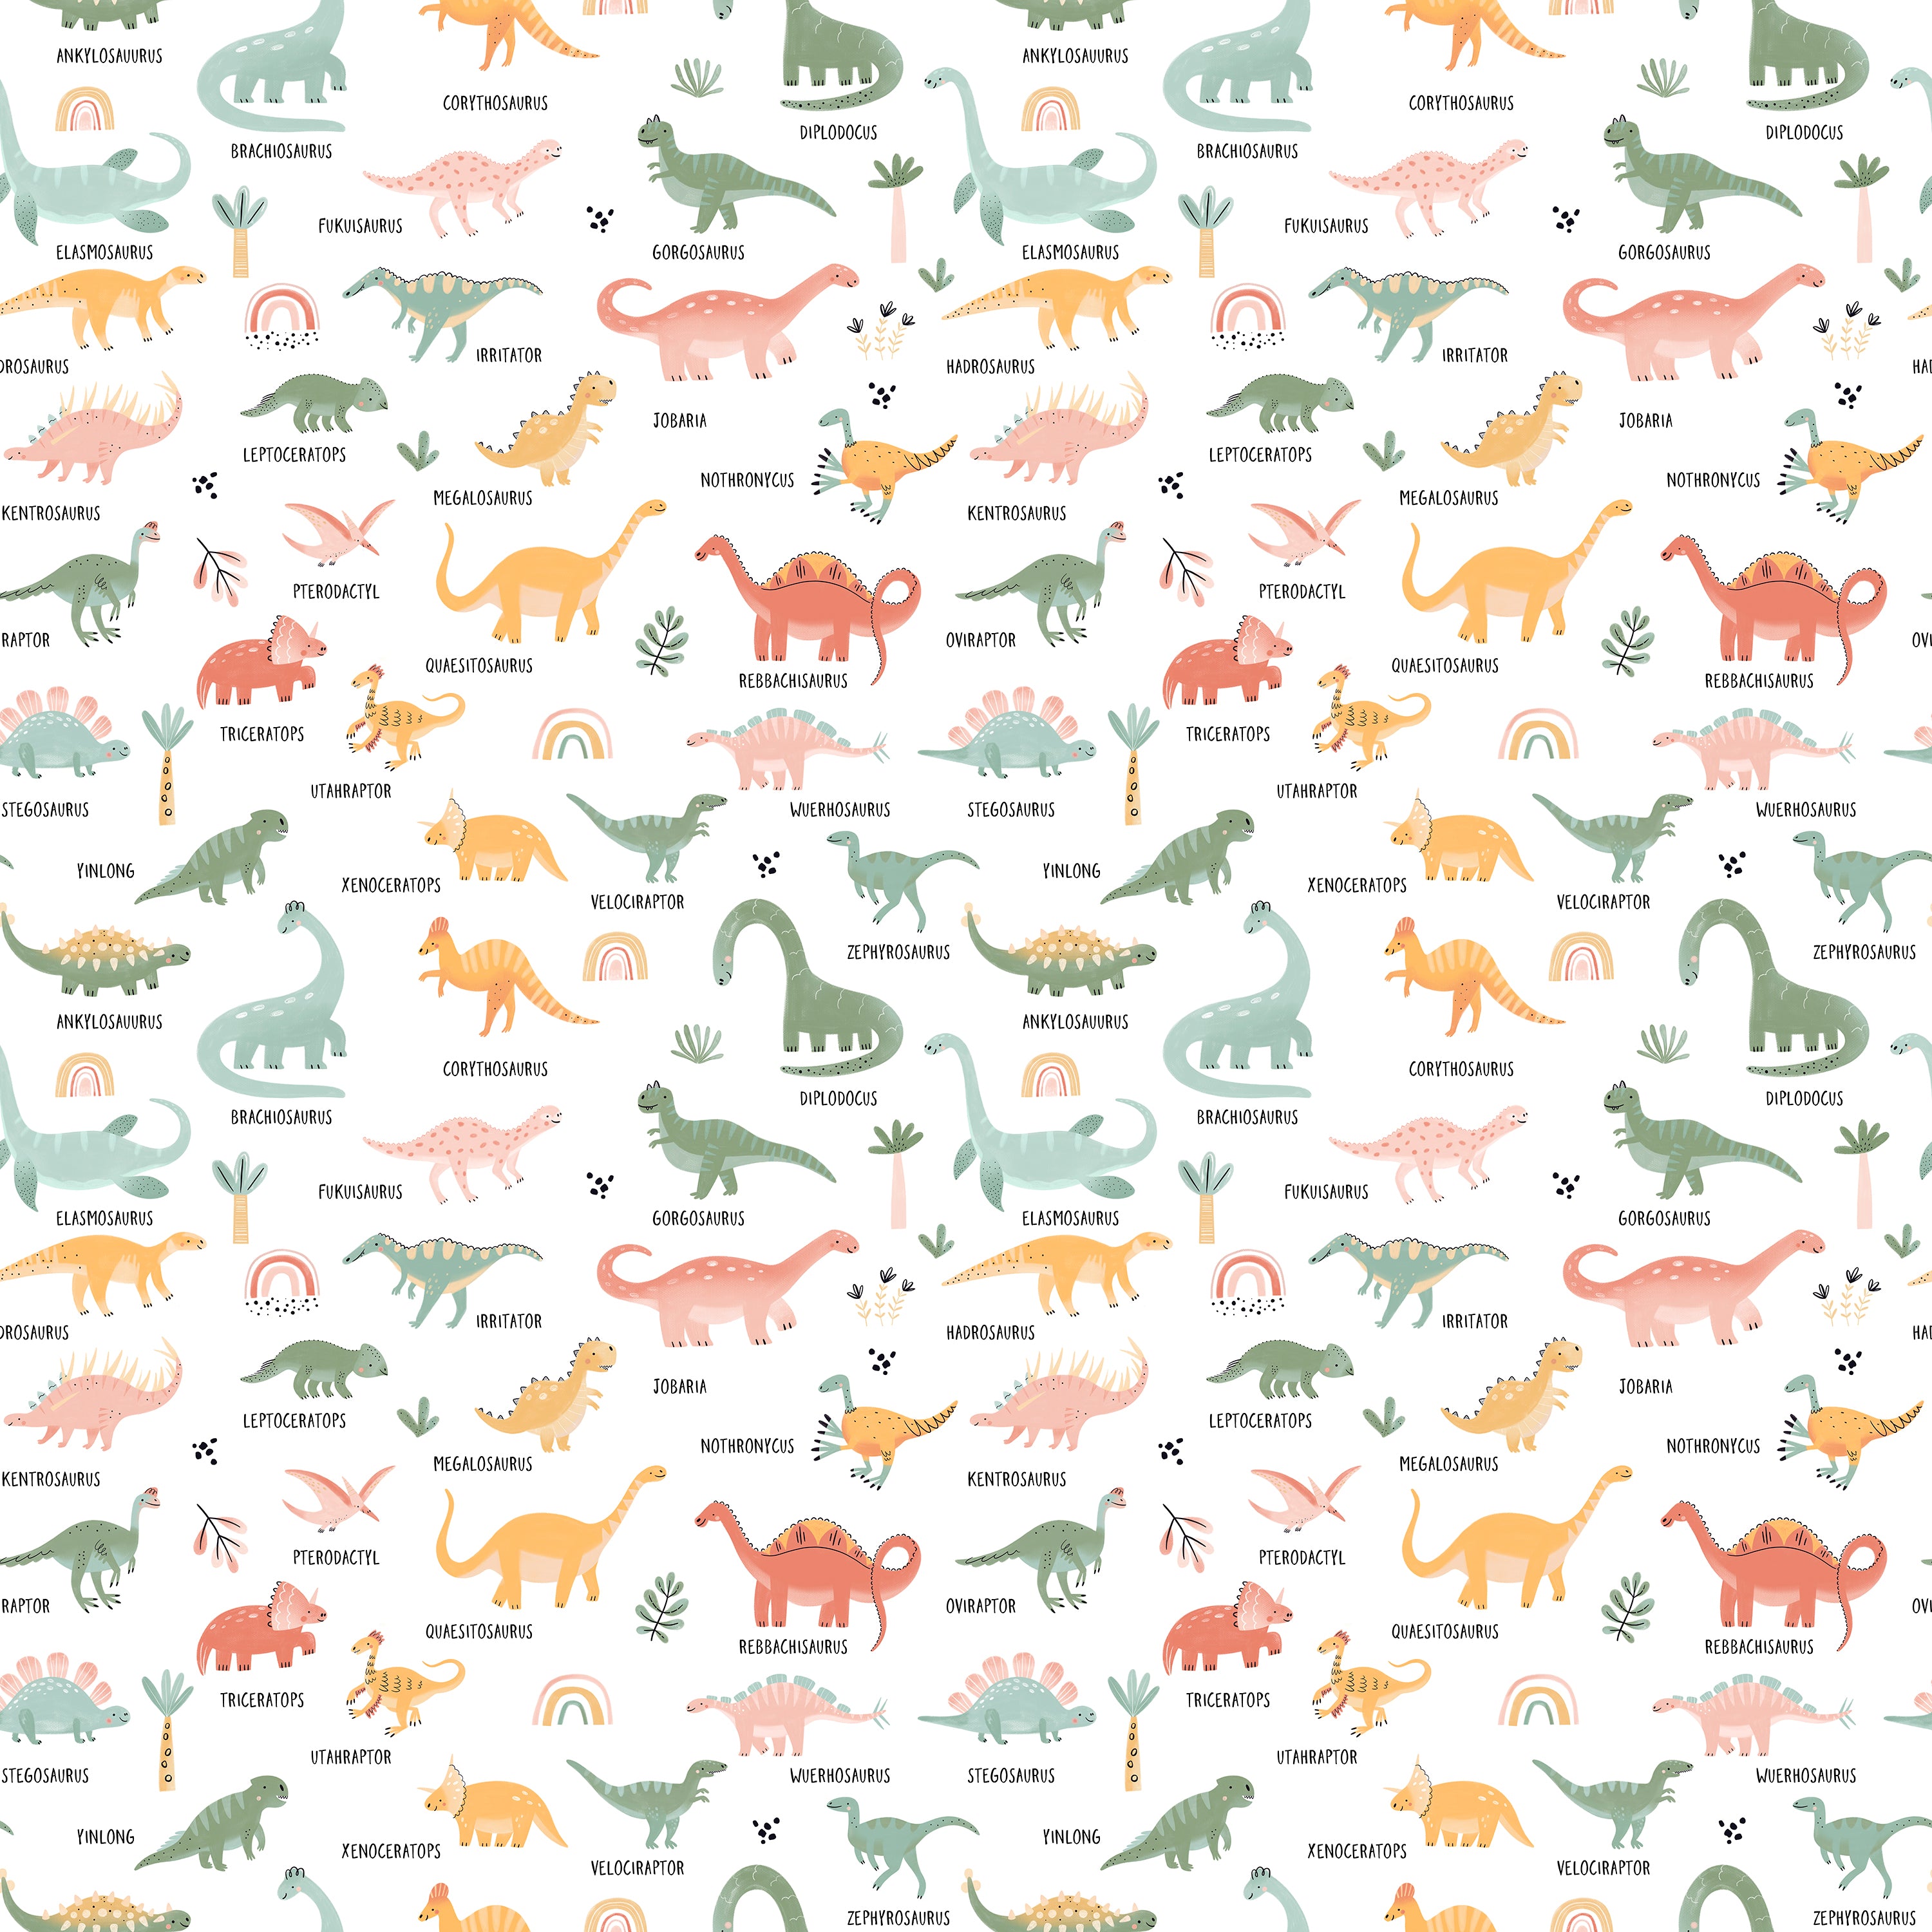 Colorful and educational wallpaper featuring a wide variety of dinosaurs labeled with their names in playful fonts. Dinosaurs are illustrated in soft pastel colors with details such as stripes and spots, set against a white background filled with small, green foliage.